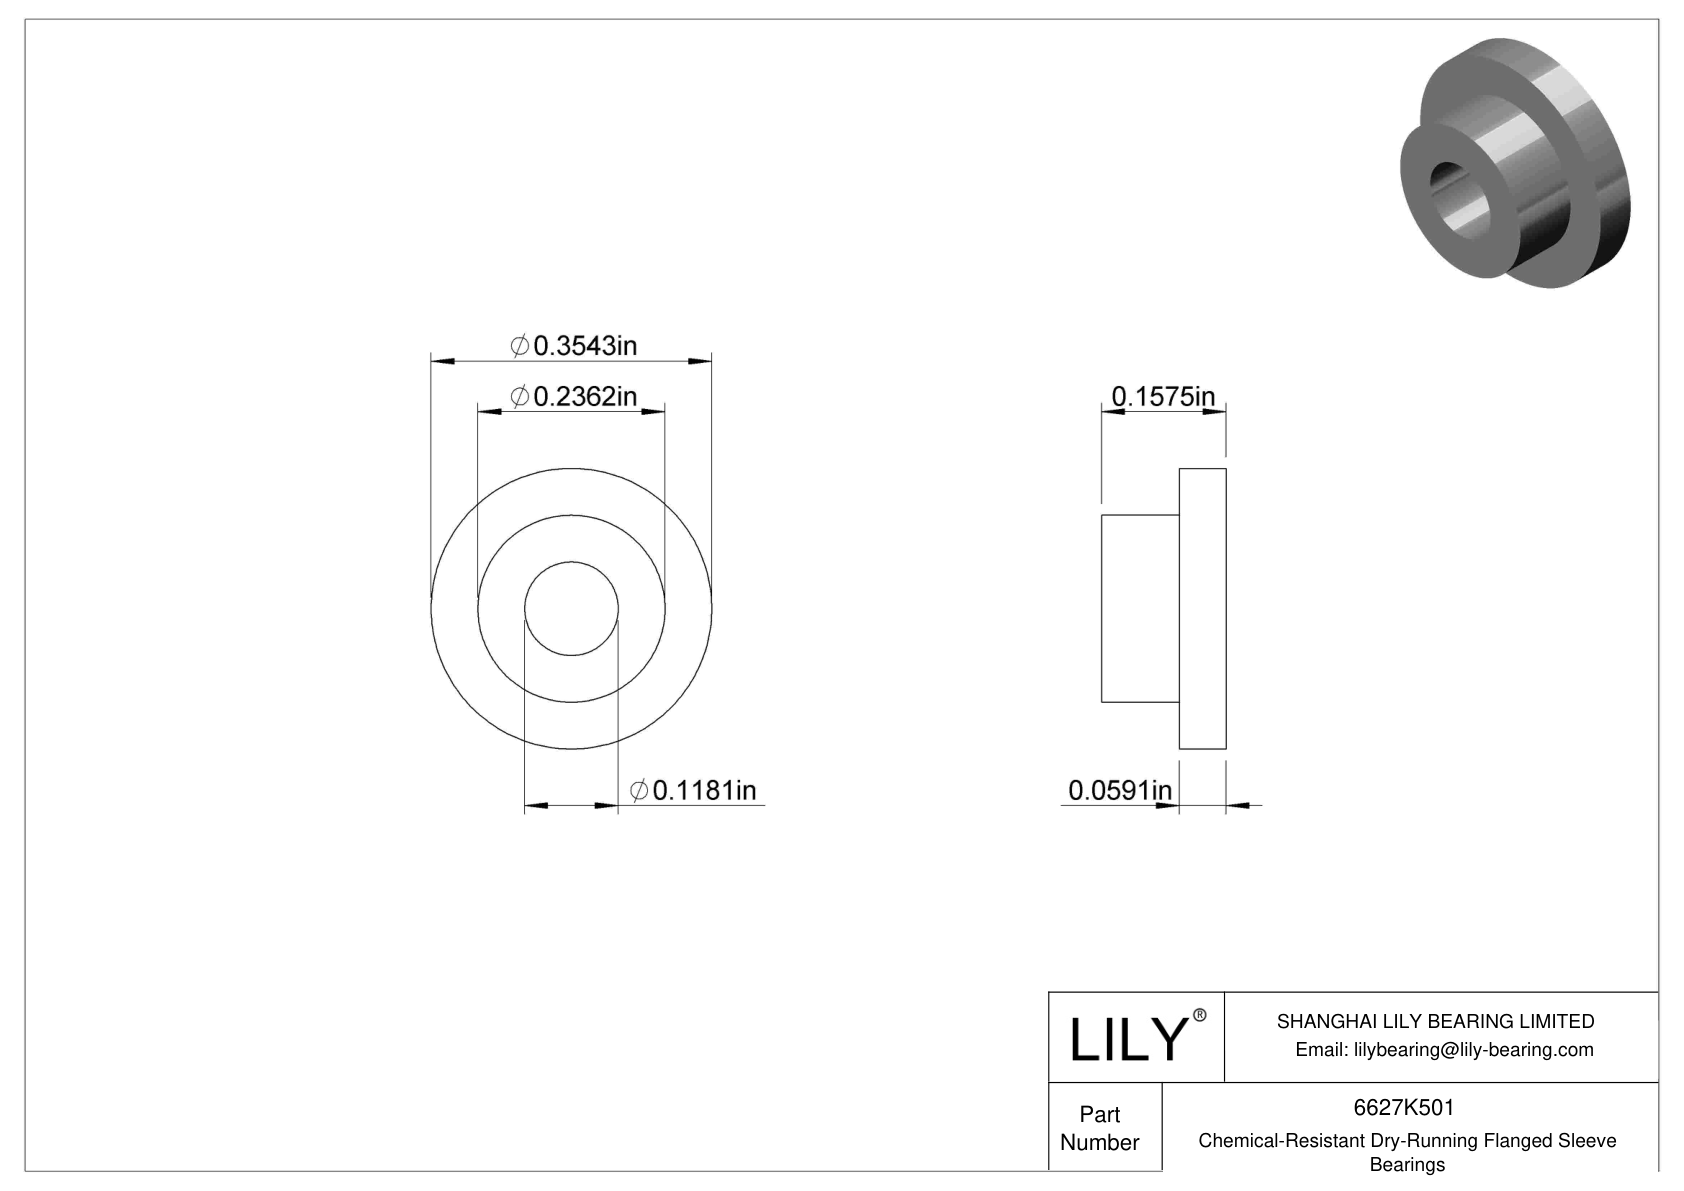 GGCHKFAB Chemical-Resistant Dry-Running Flanged Sleeve Bearings cad drawing